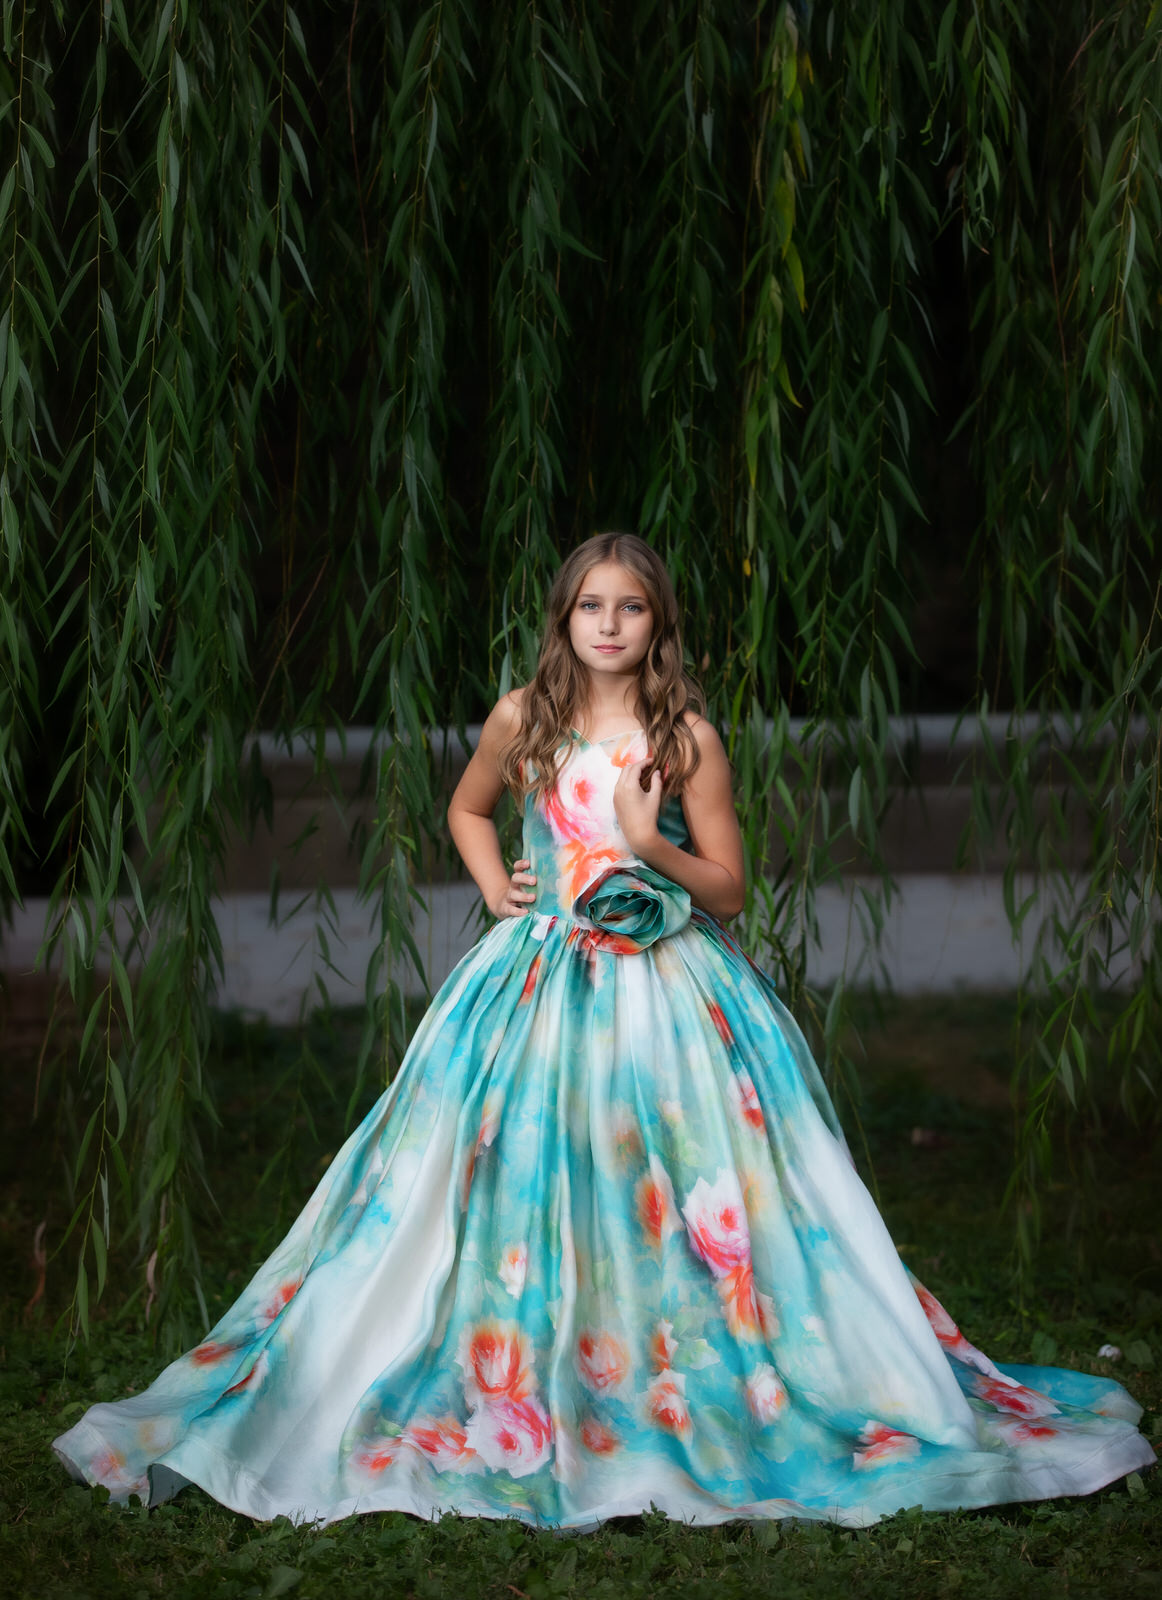 A teen girl stands under a willow tree in a large floral gown with a hand on her hip fort worth pediatricians